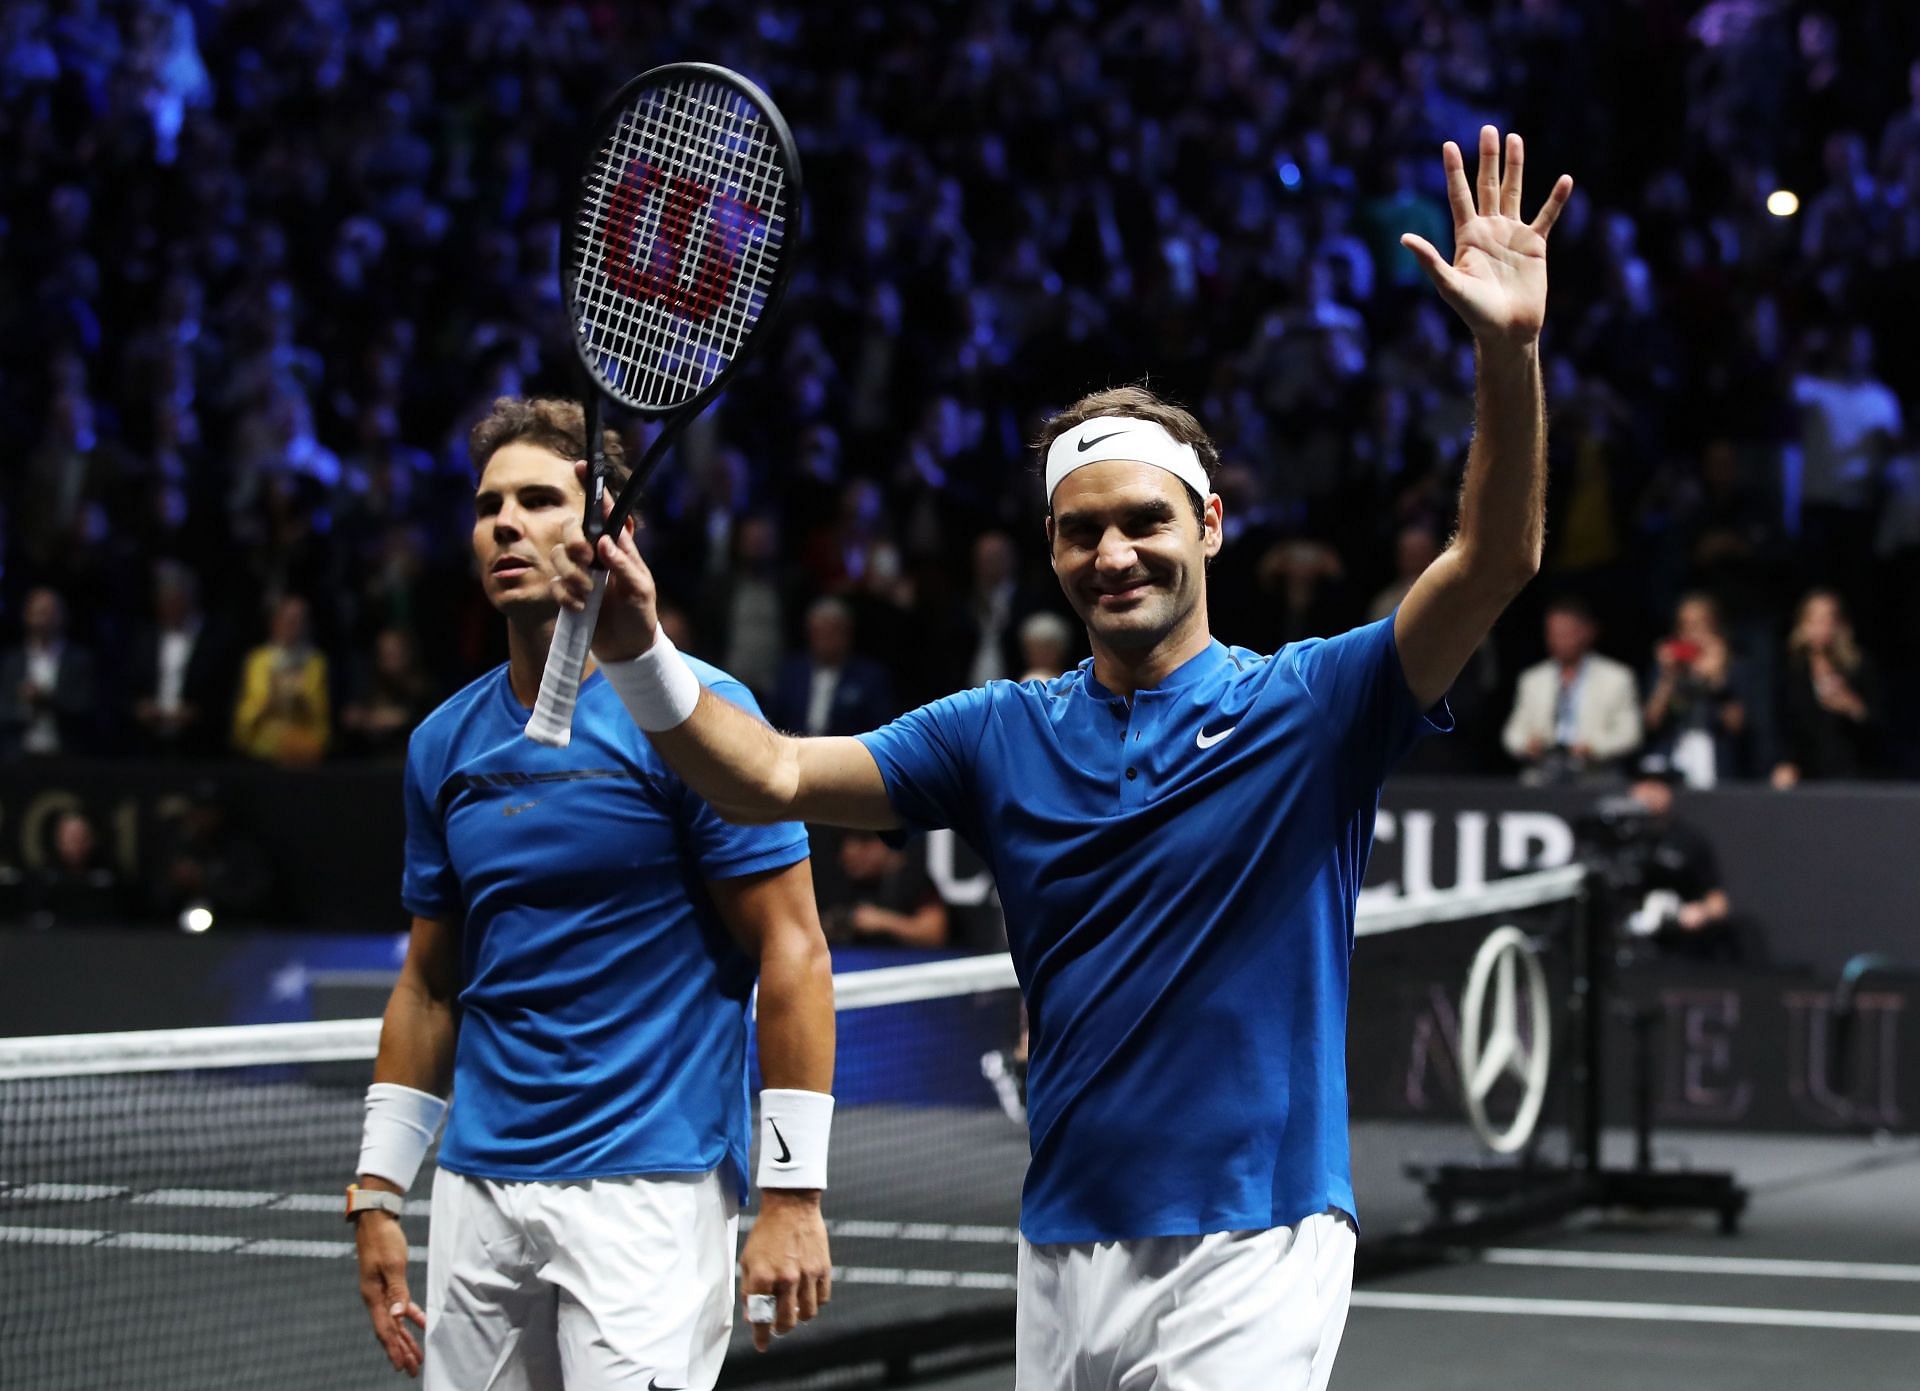 Rafael Nadal and Roger Federer will team up once again at the Laver Cup in September